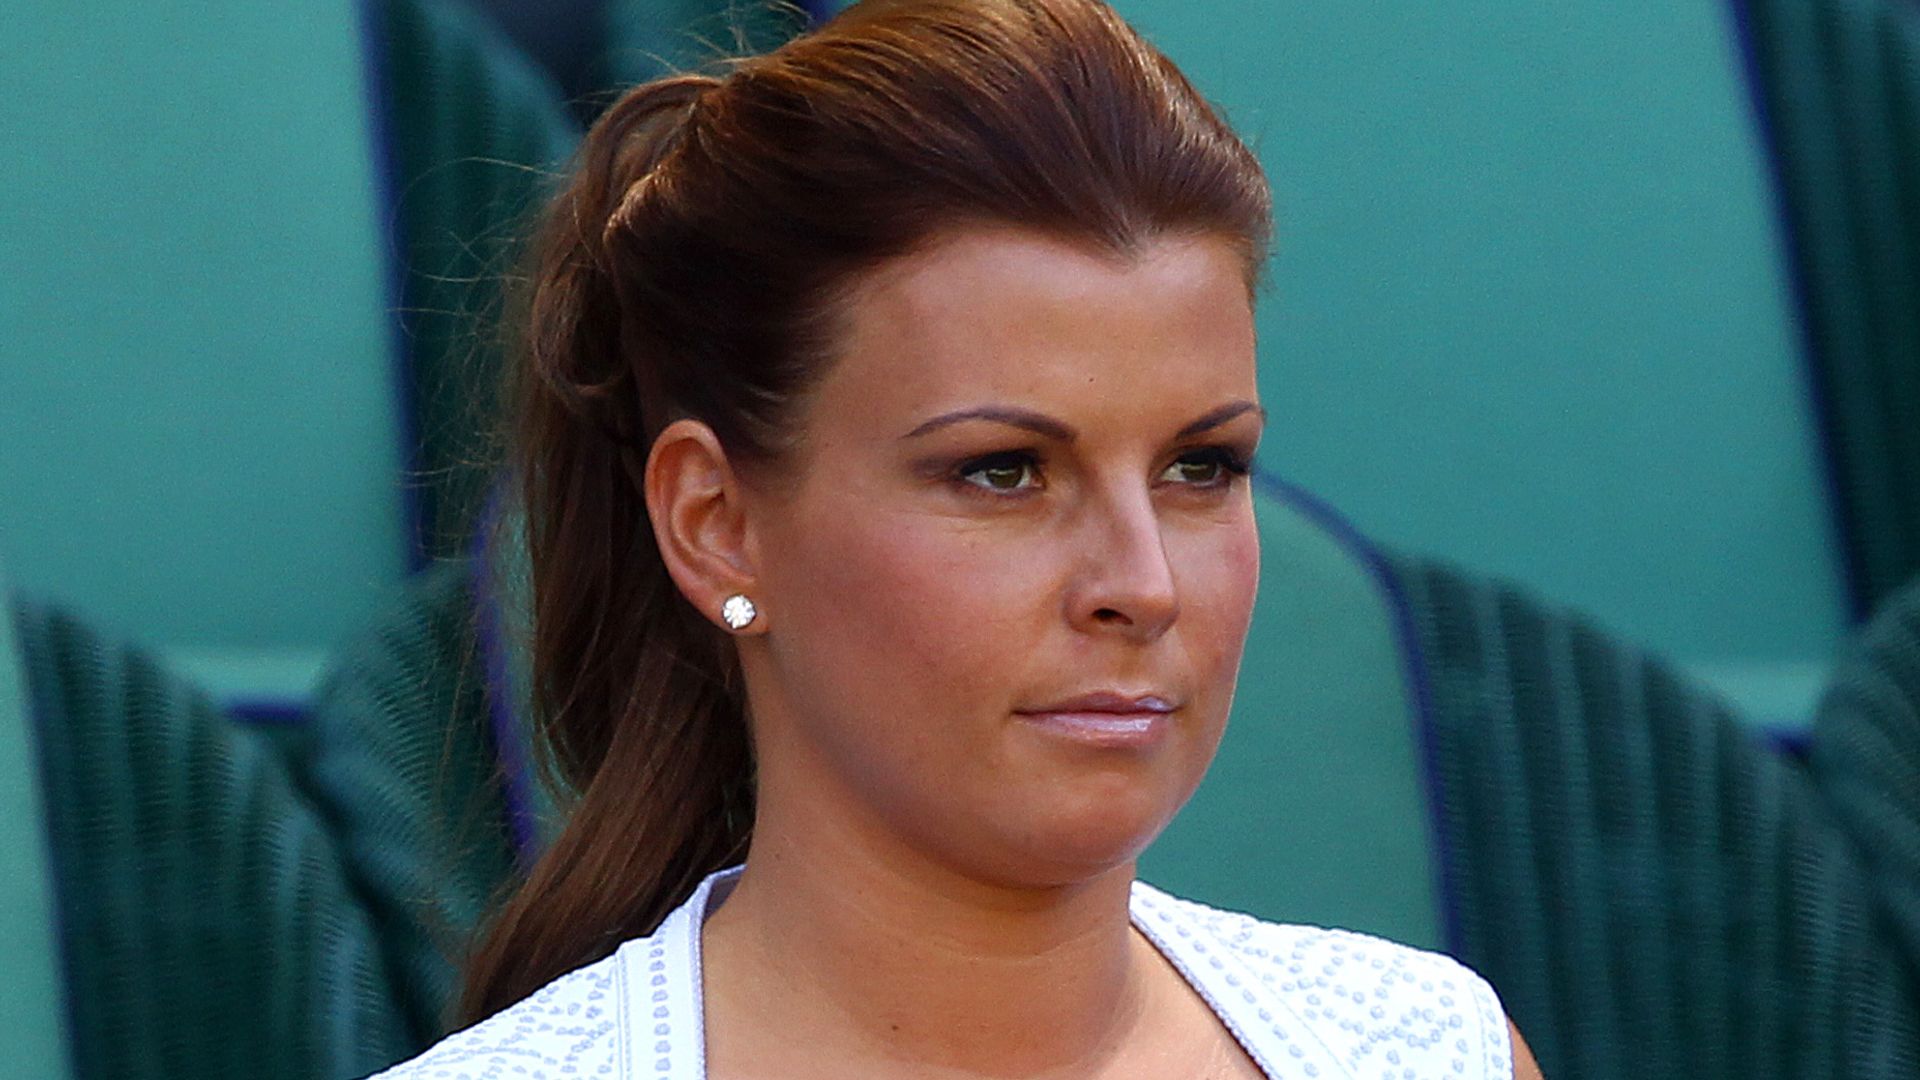 Coleen Rooney in a white dress with her hair in a ponytail attends the Gentlemen's Singles Final match in 2013